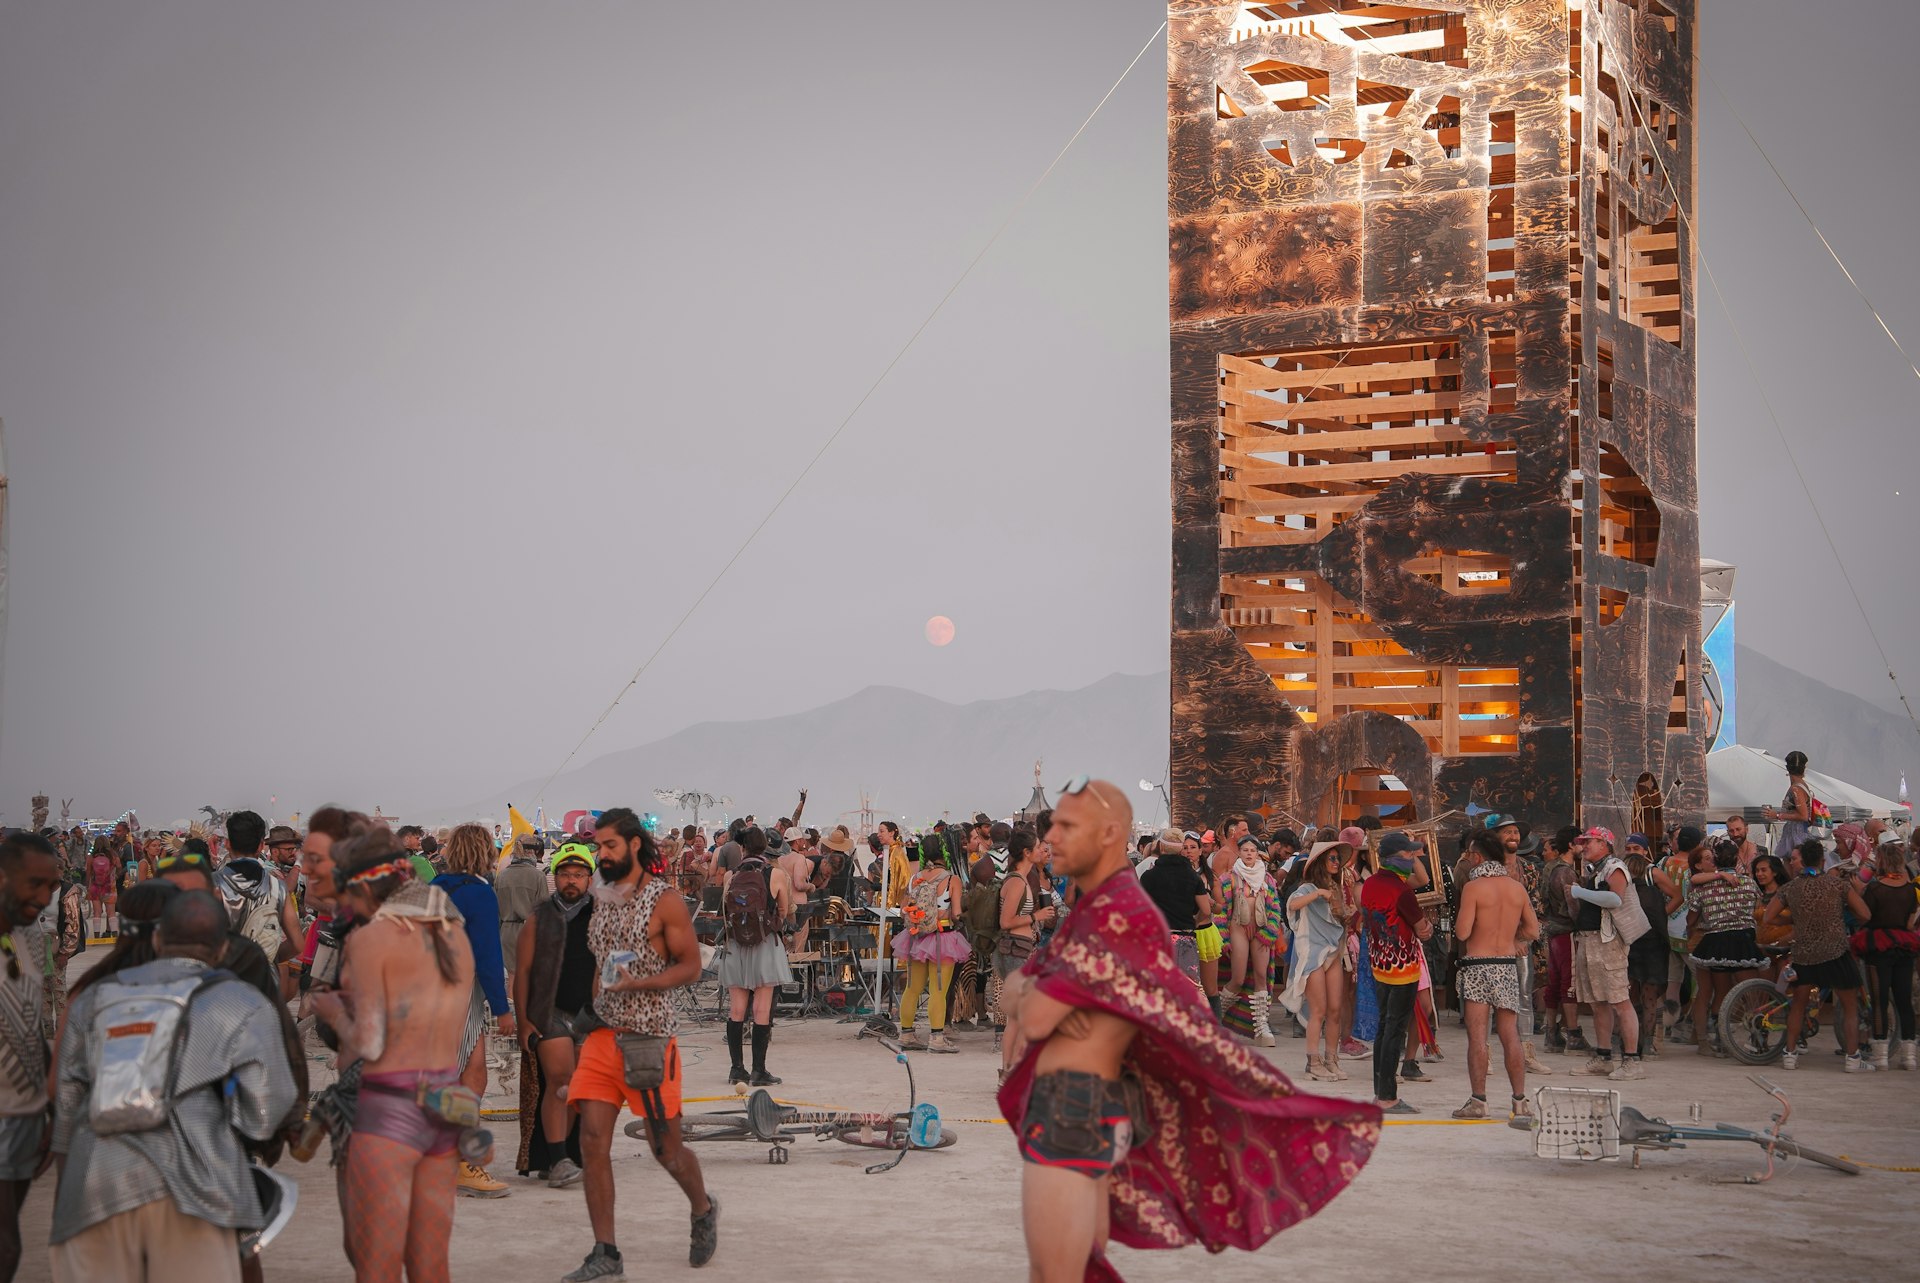 Costumed revelers stand in front of a structure at the Burning Man festival, Black Rock Desert, Nevada, USA